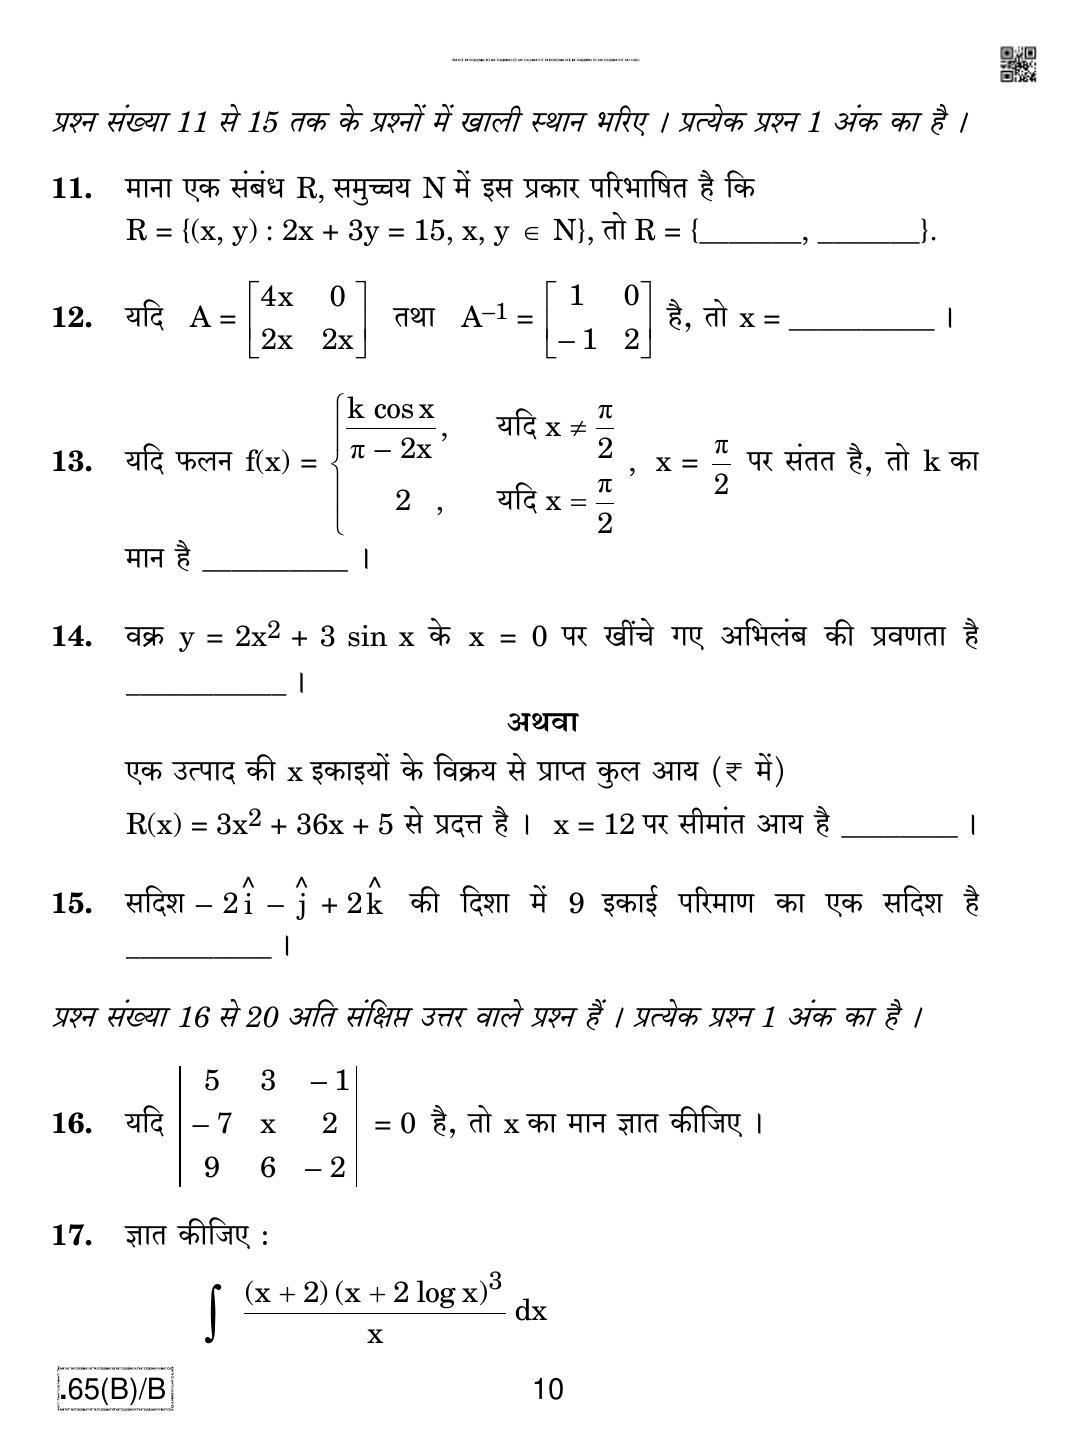 CBSE Class 12 65(B)-C - Maths For Blind Candidates 2020 Compartment Question Paper - Page 10